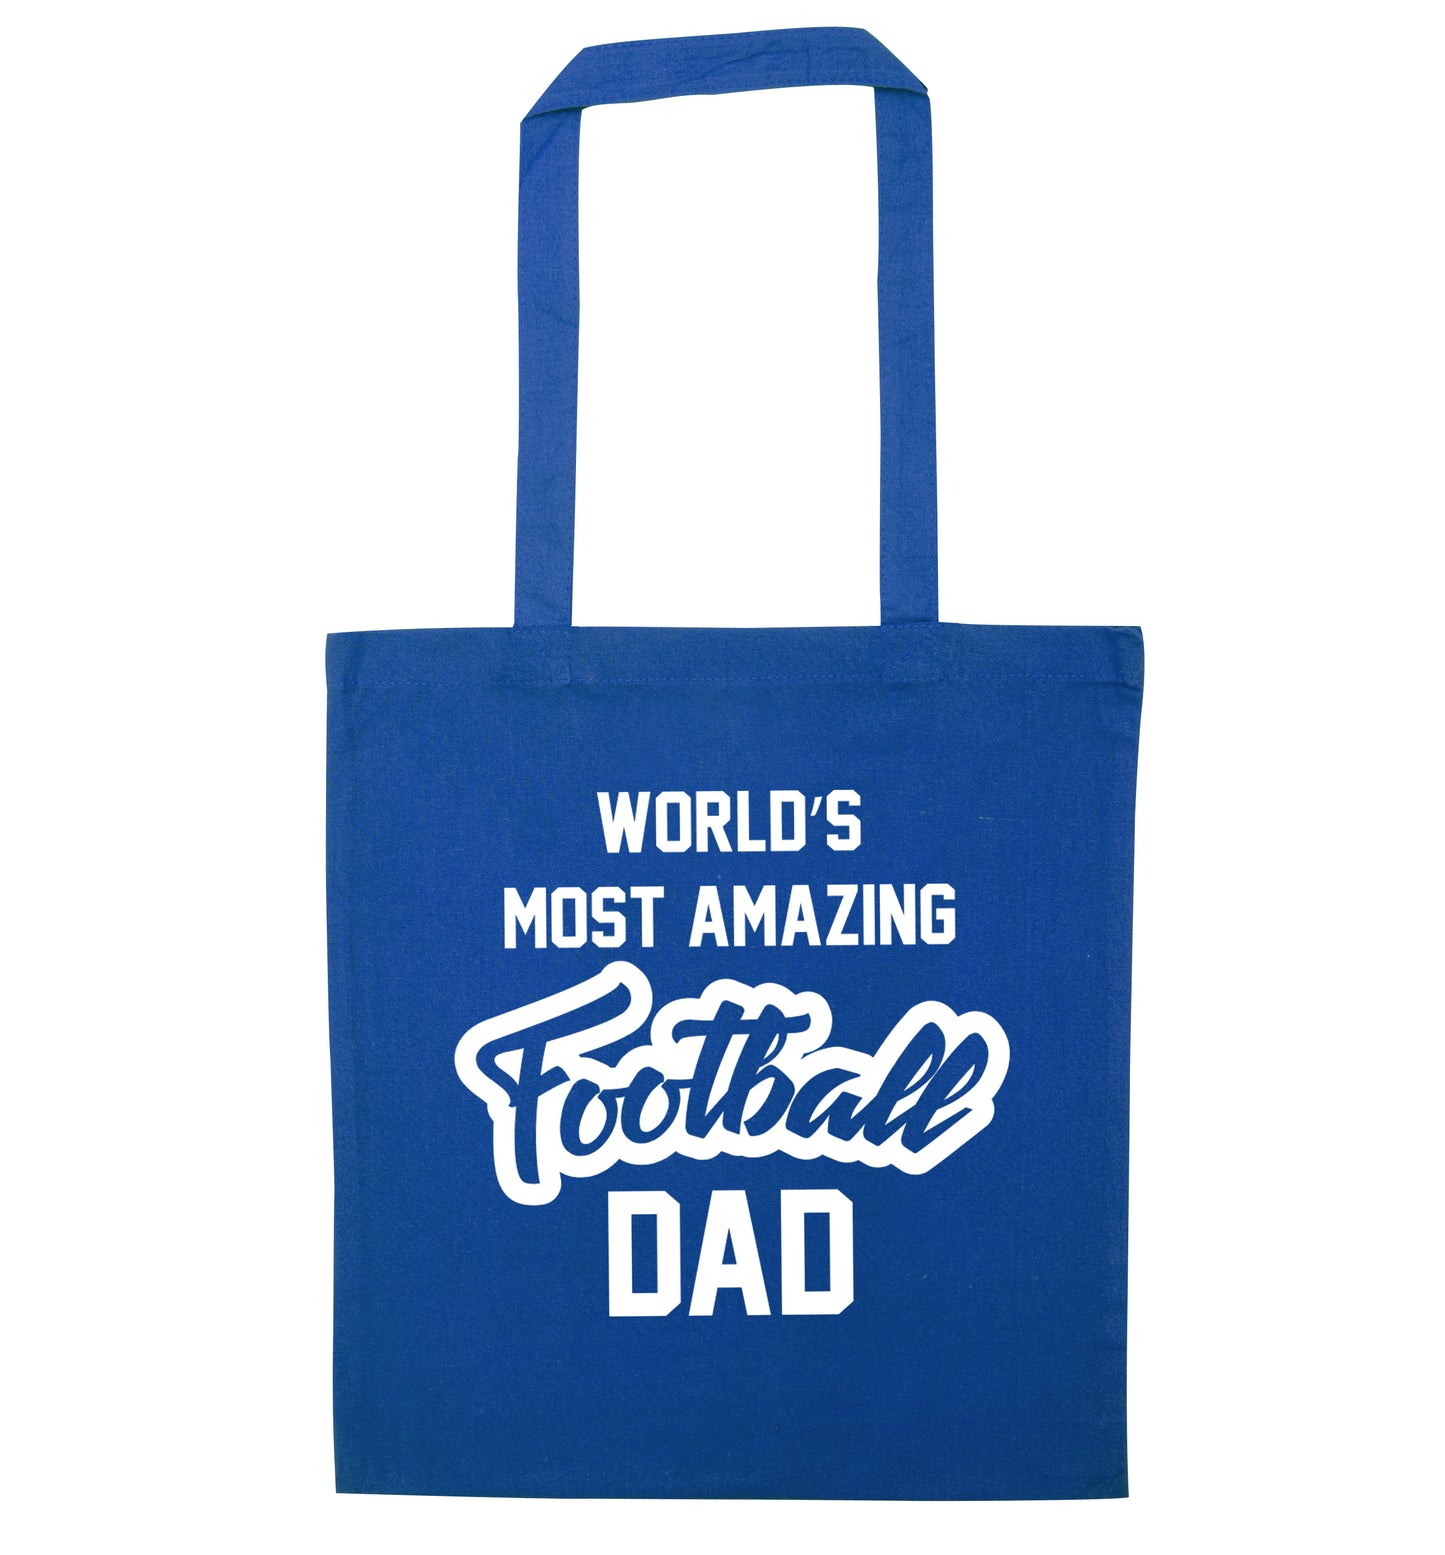 Worlds most amazing football dad blue tote bag